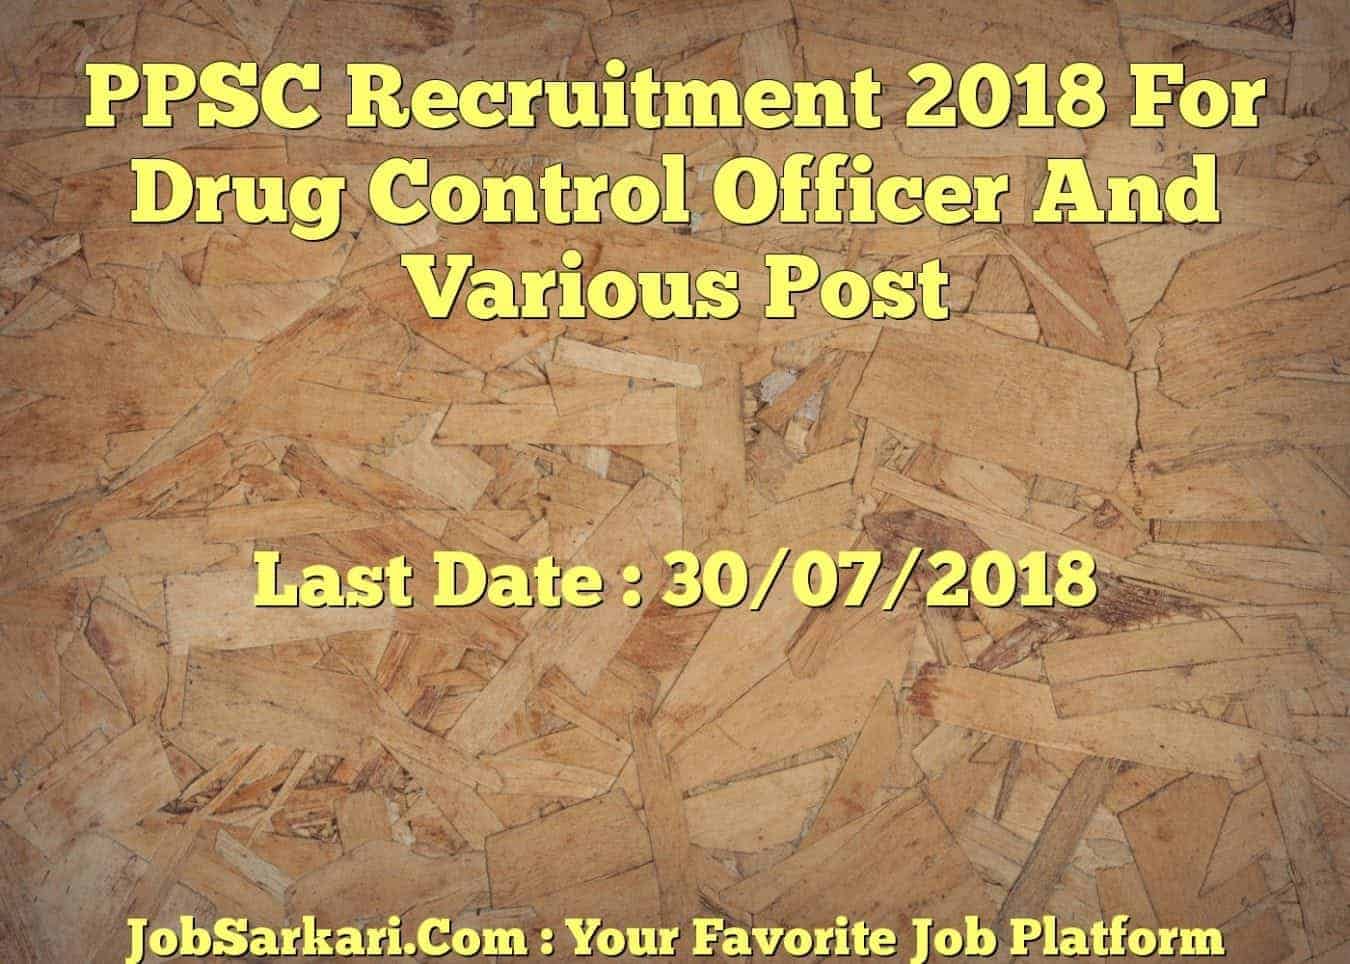 PPSC Recruitment 2018 For Drug Control Officer And Various Post